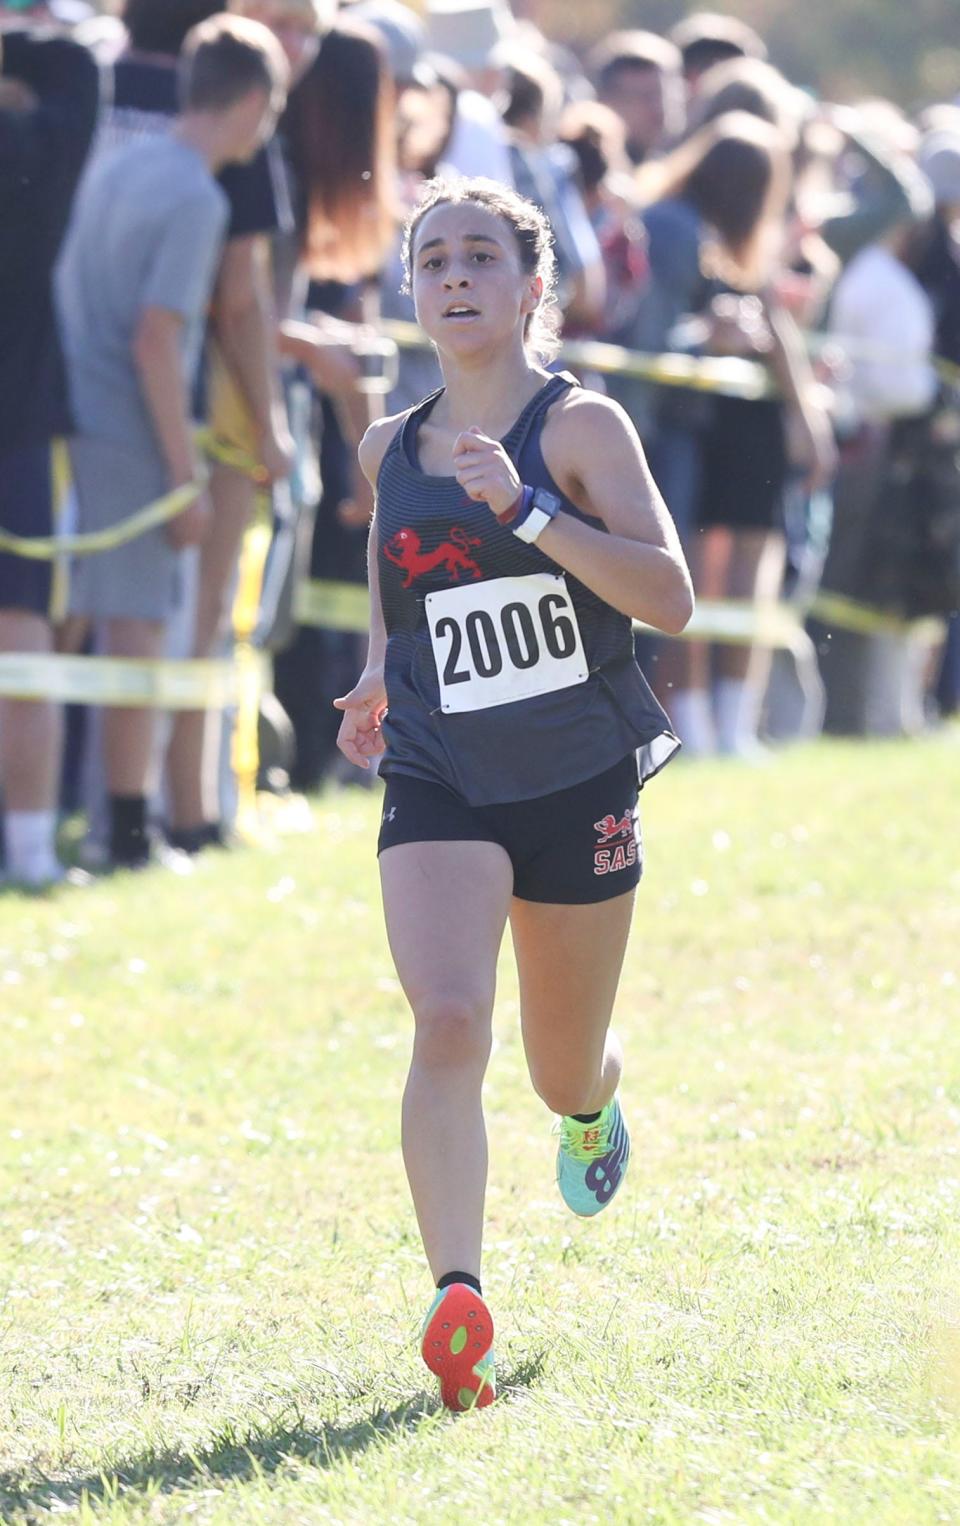 Leah Horgan, shown here earlier this season, helped St. Andrew's to its first girls team championship at the New Castle County cross country meet on Saturday at Winterthur.